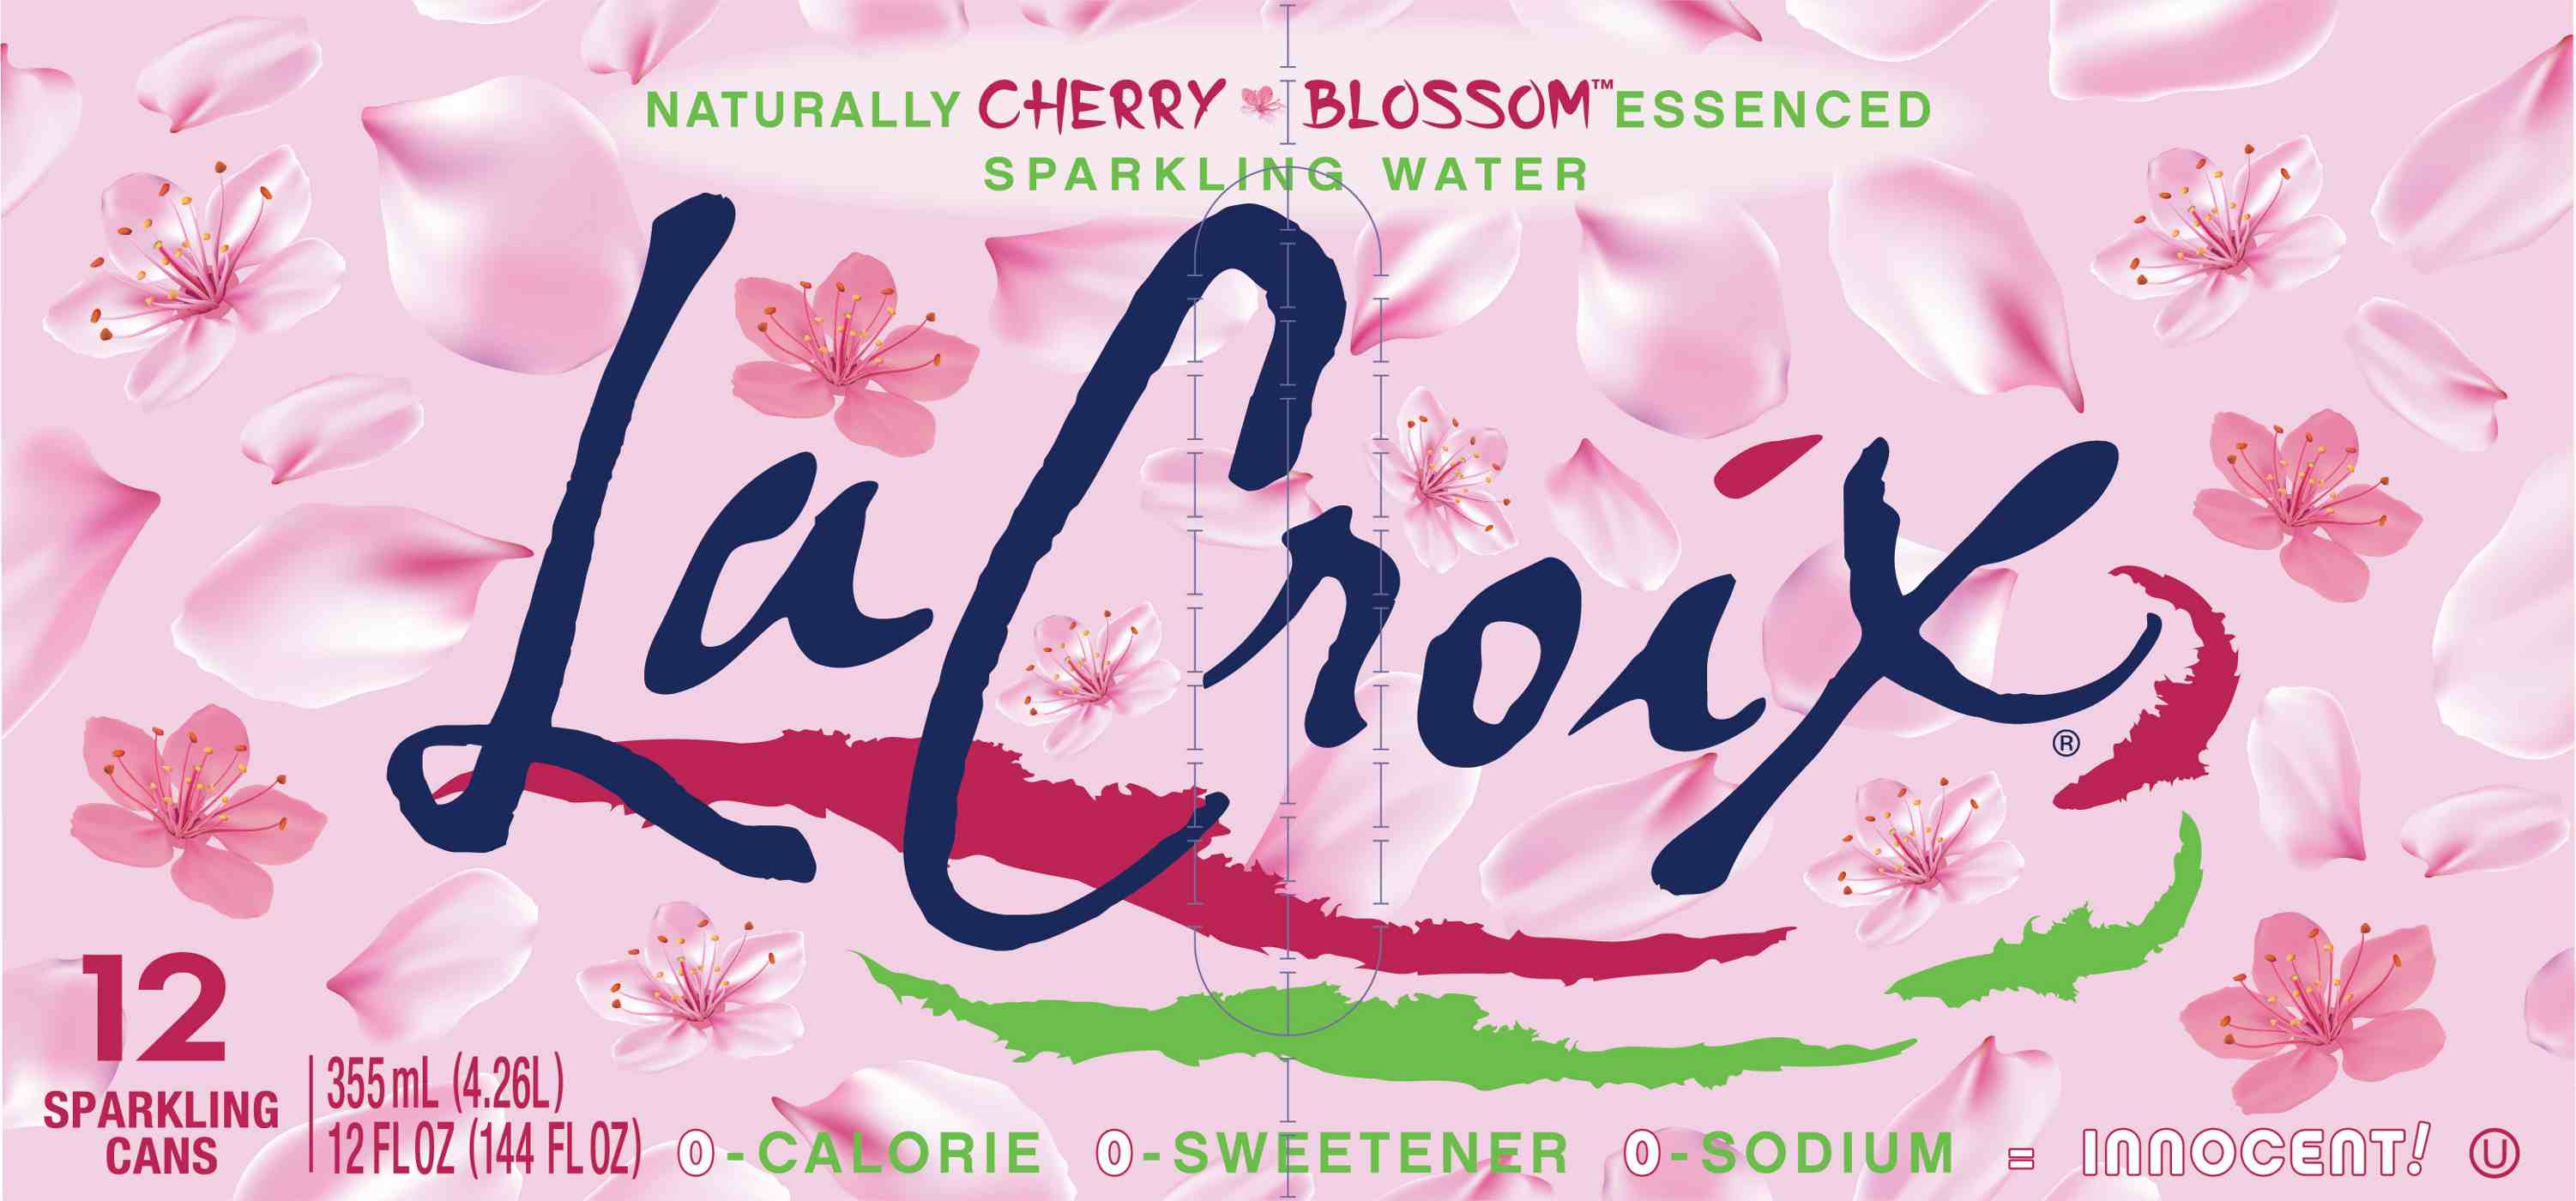 LaCroix Cherry Blossom Sparkling Water 12 oz Cans; image 4 of 4